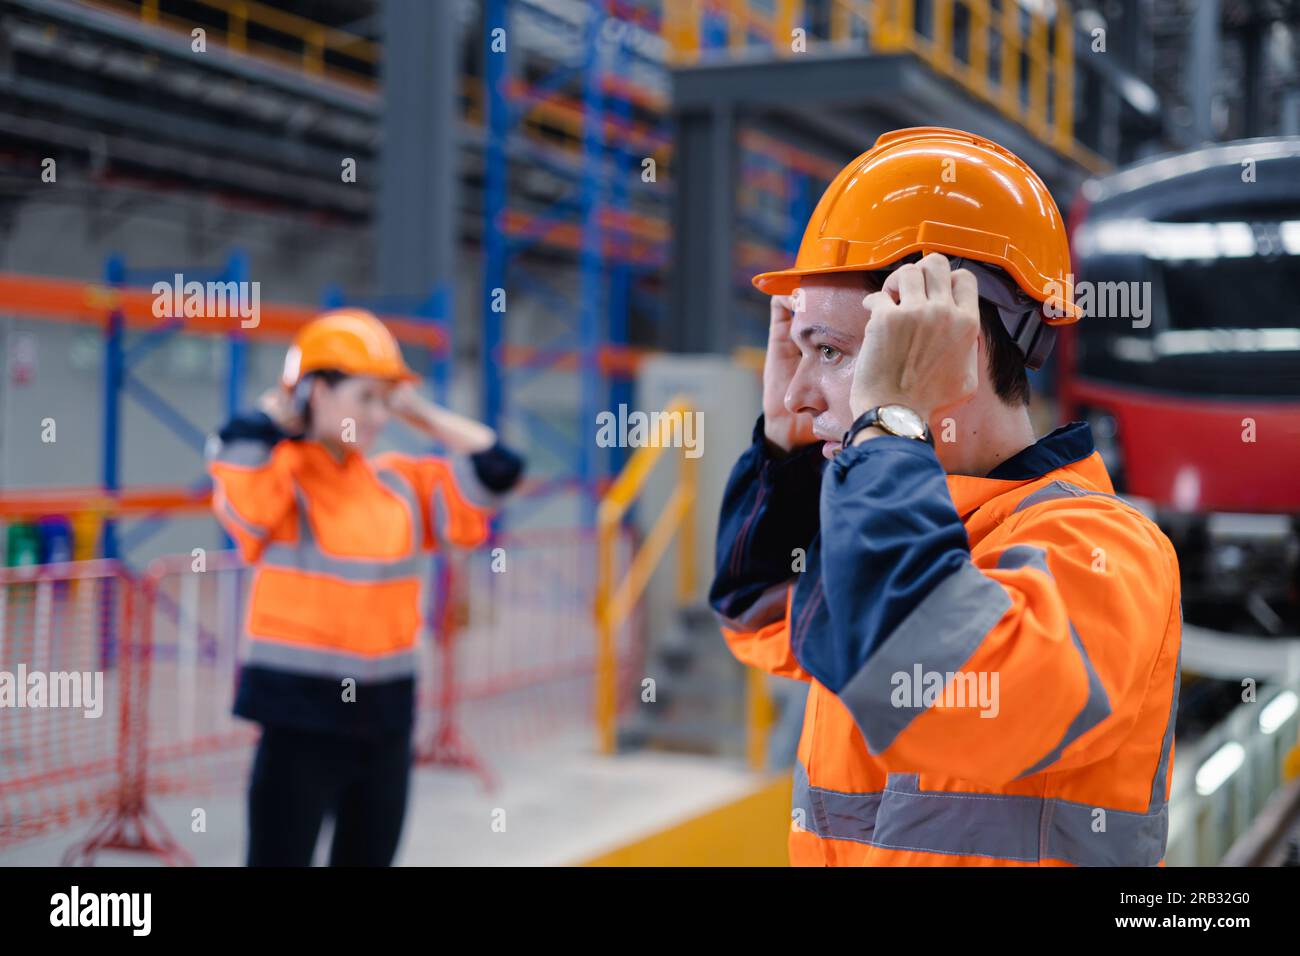 Engineer team worker check safety helmet clothing for work electric train service depot transport industry factory technician mechanic staff. Stock Photo